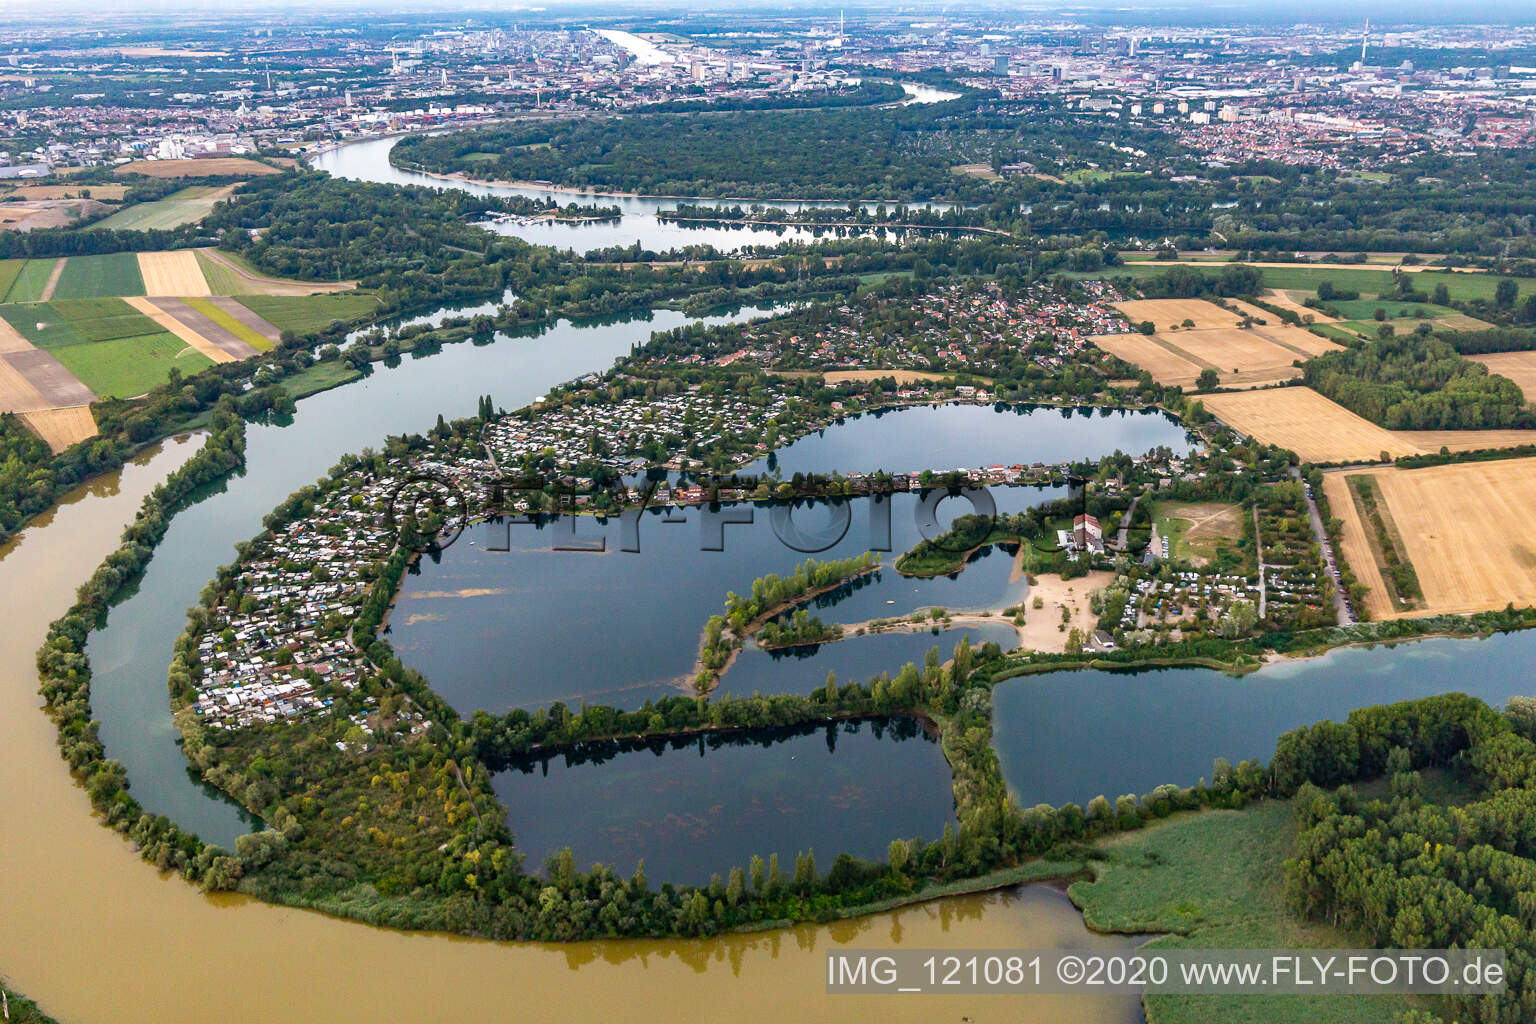 Lakes and beach areas on the recreation area Blaue Adria in the district Riedsiedlung in Altrip in the state Rhineland-Palatinate out of the air